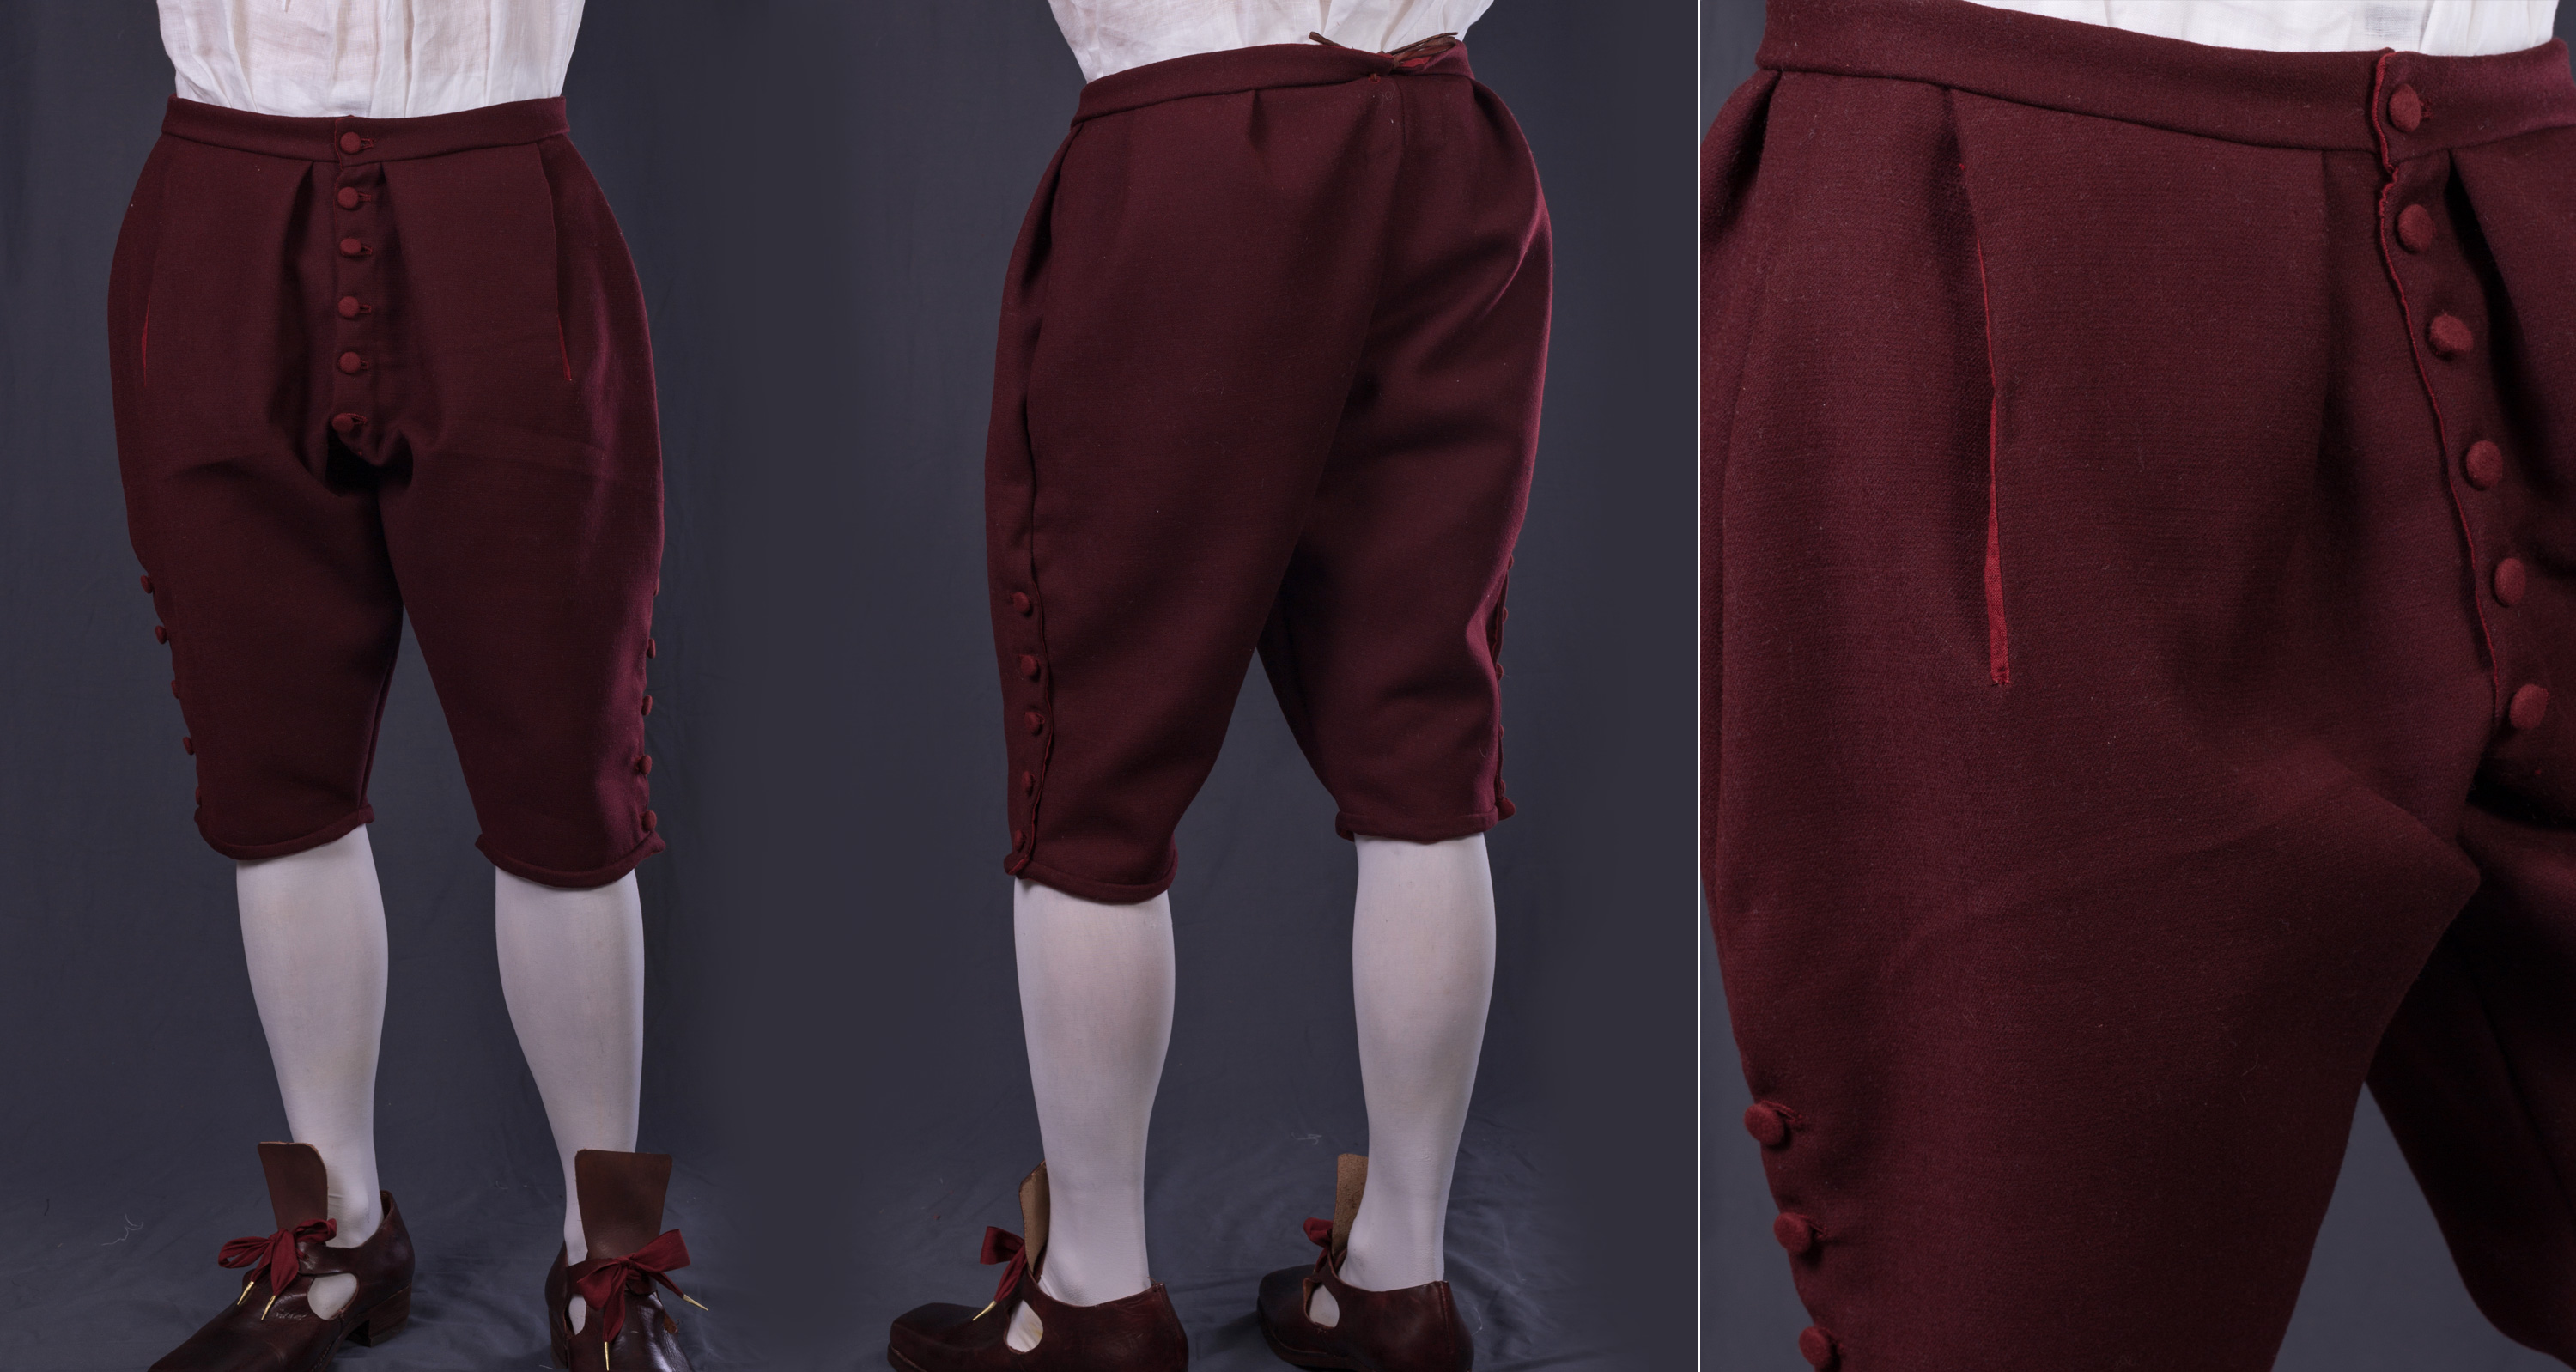 15th Century Pants - Pants And Breeches at